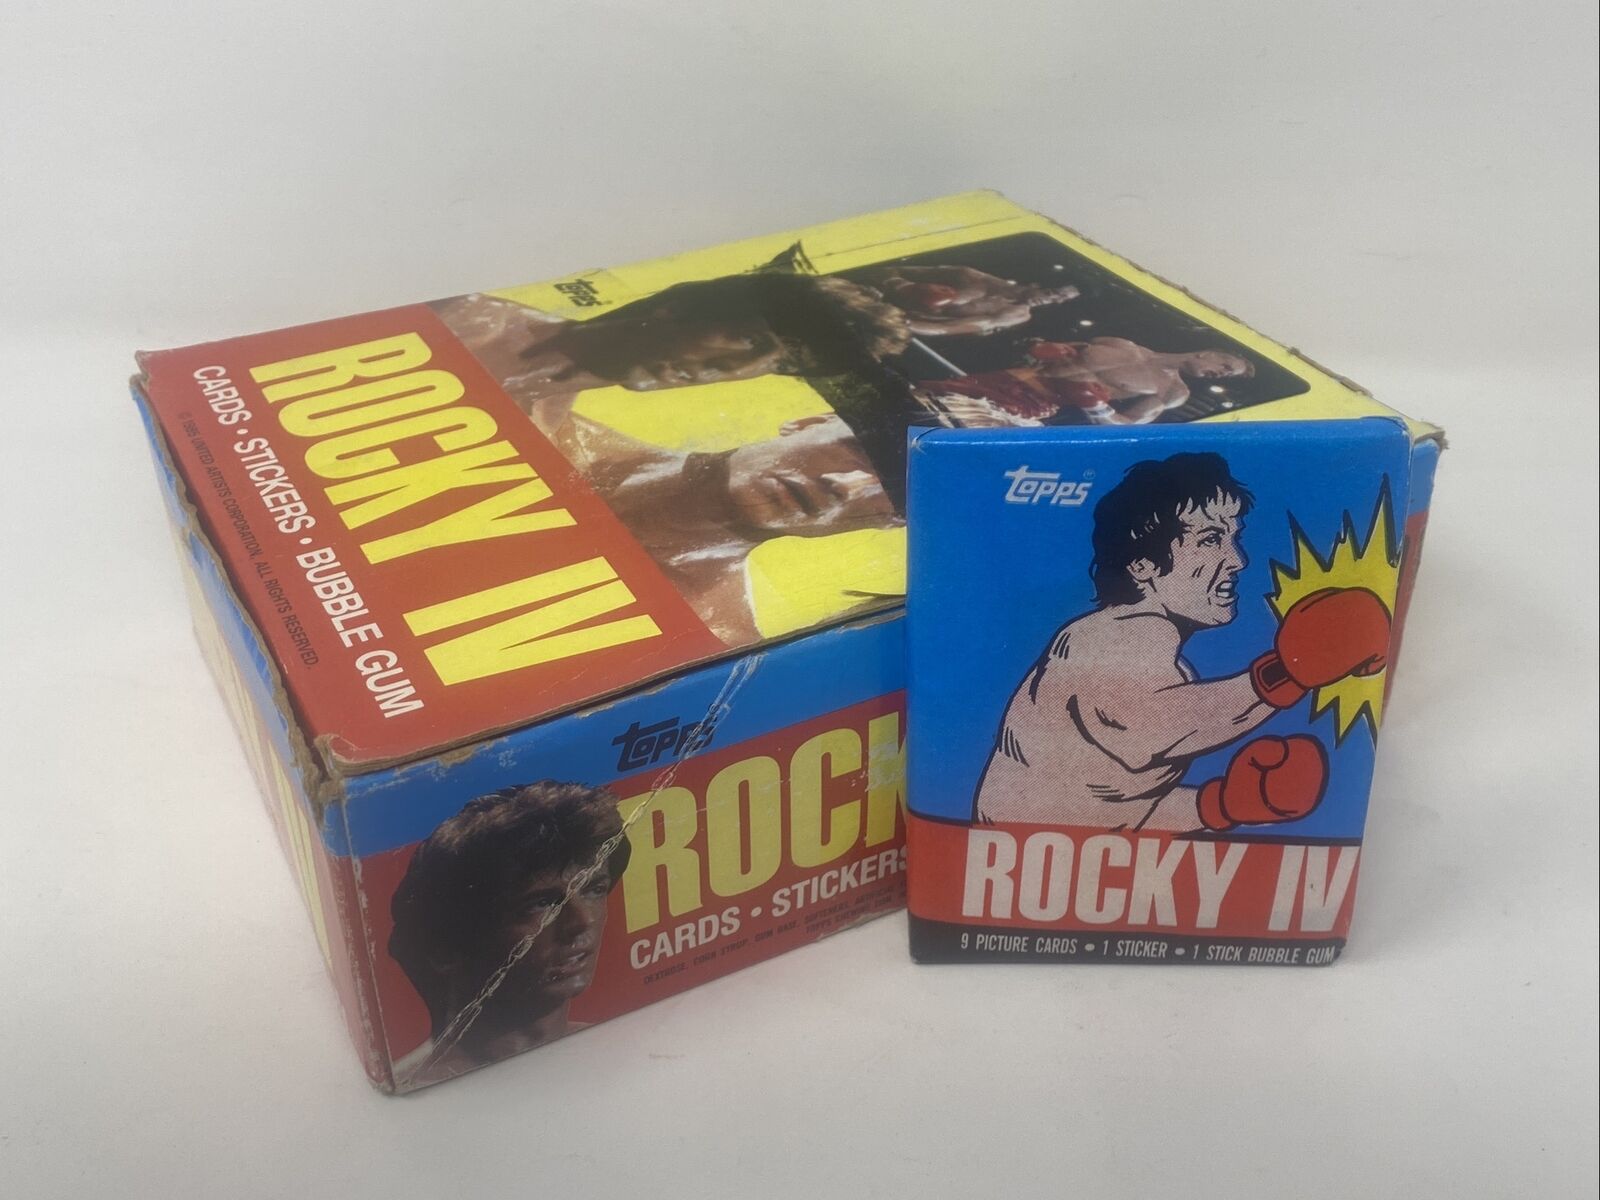 Rocky IV, Full Trading Card Box by Topps, 36 Unopened Wax Packs, Topps 1985